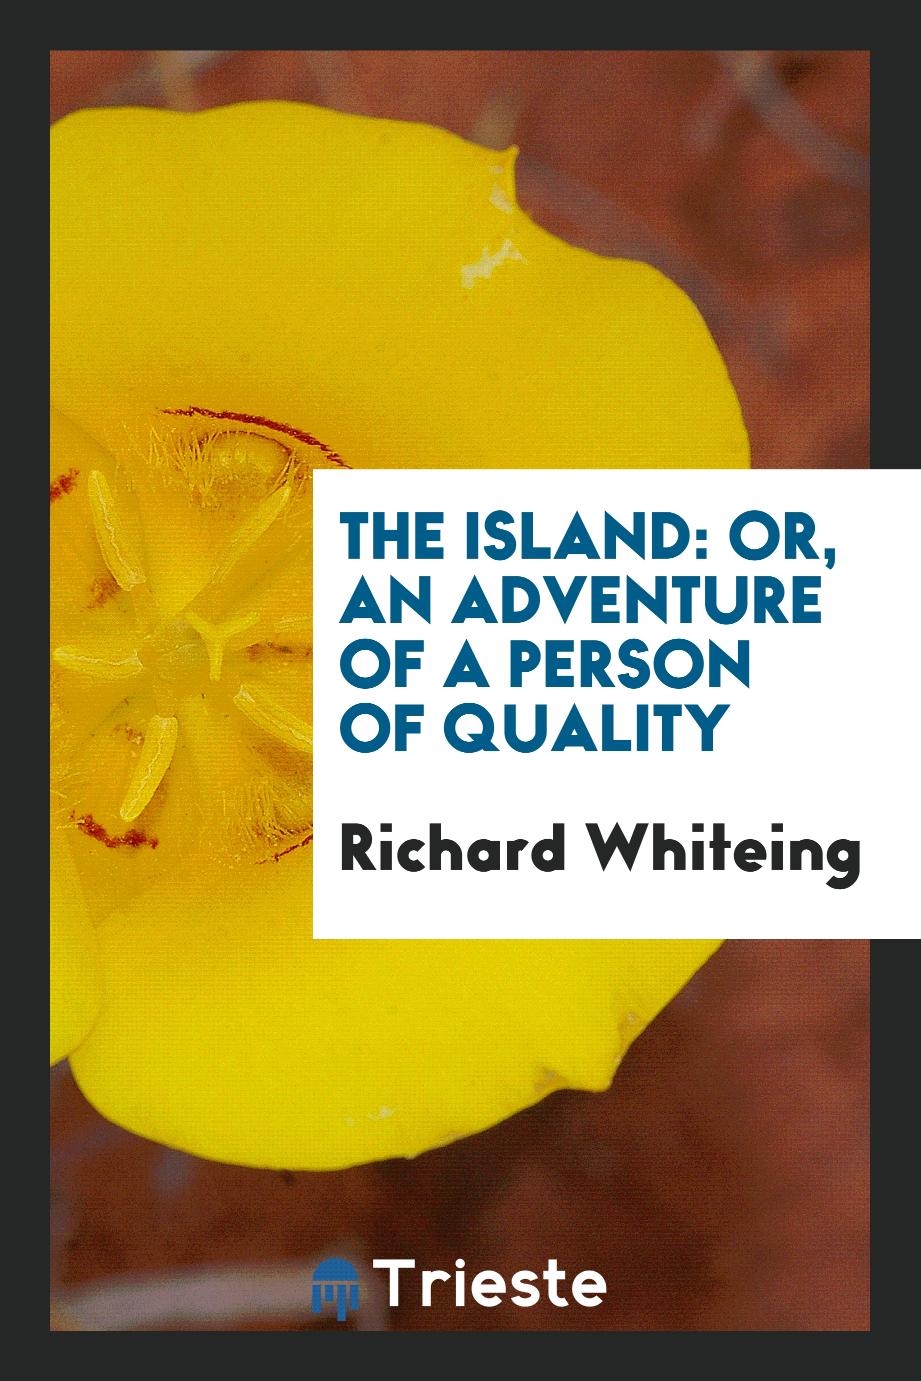 The Island: Or, An Adventure of a Person of Quality